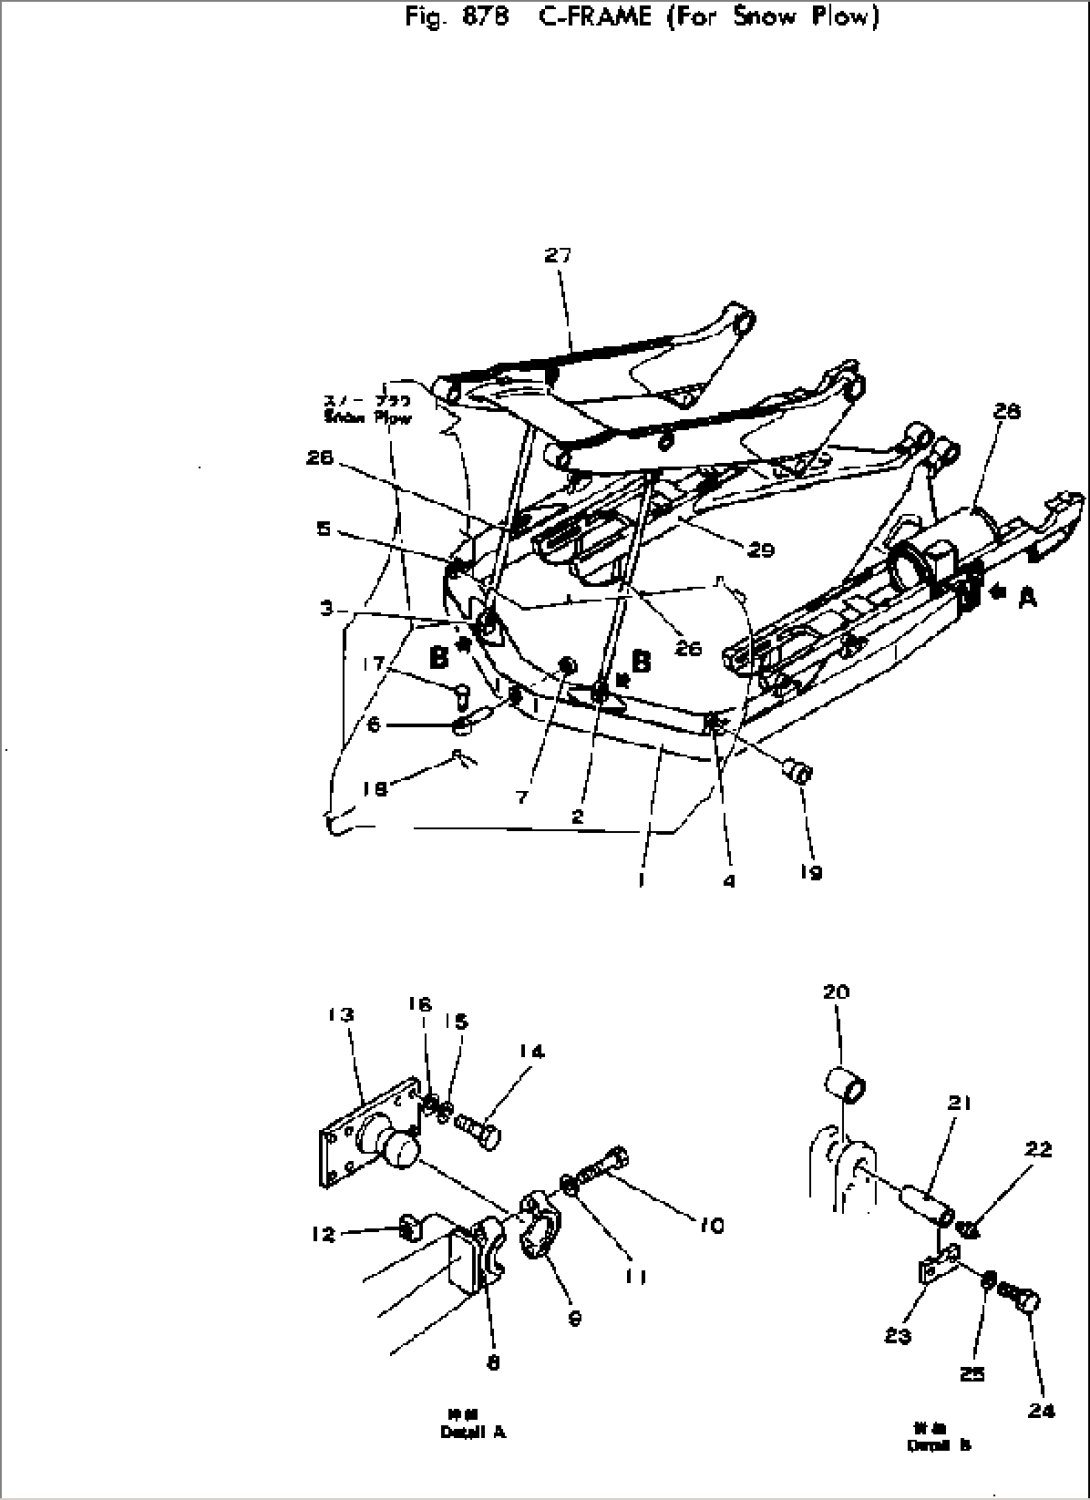 C-FRAME (FOR SNOW PLOW)